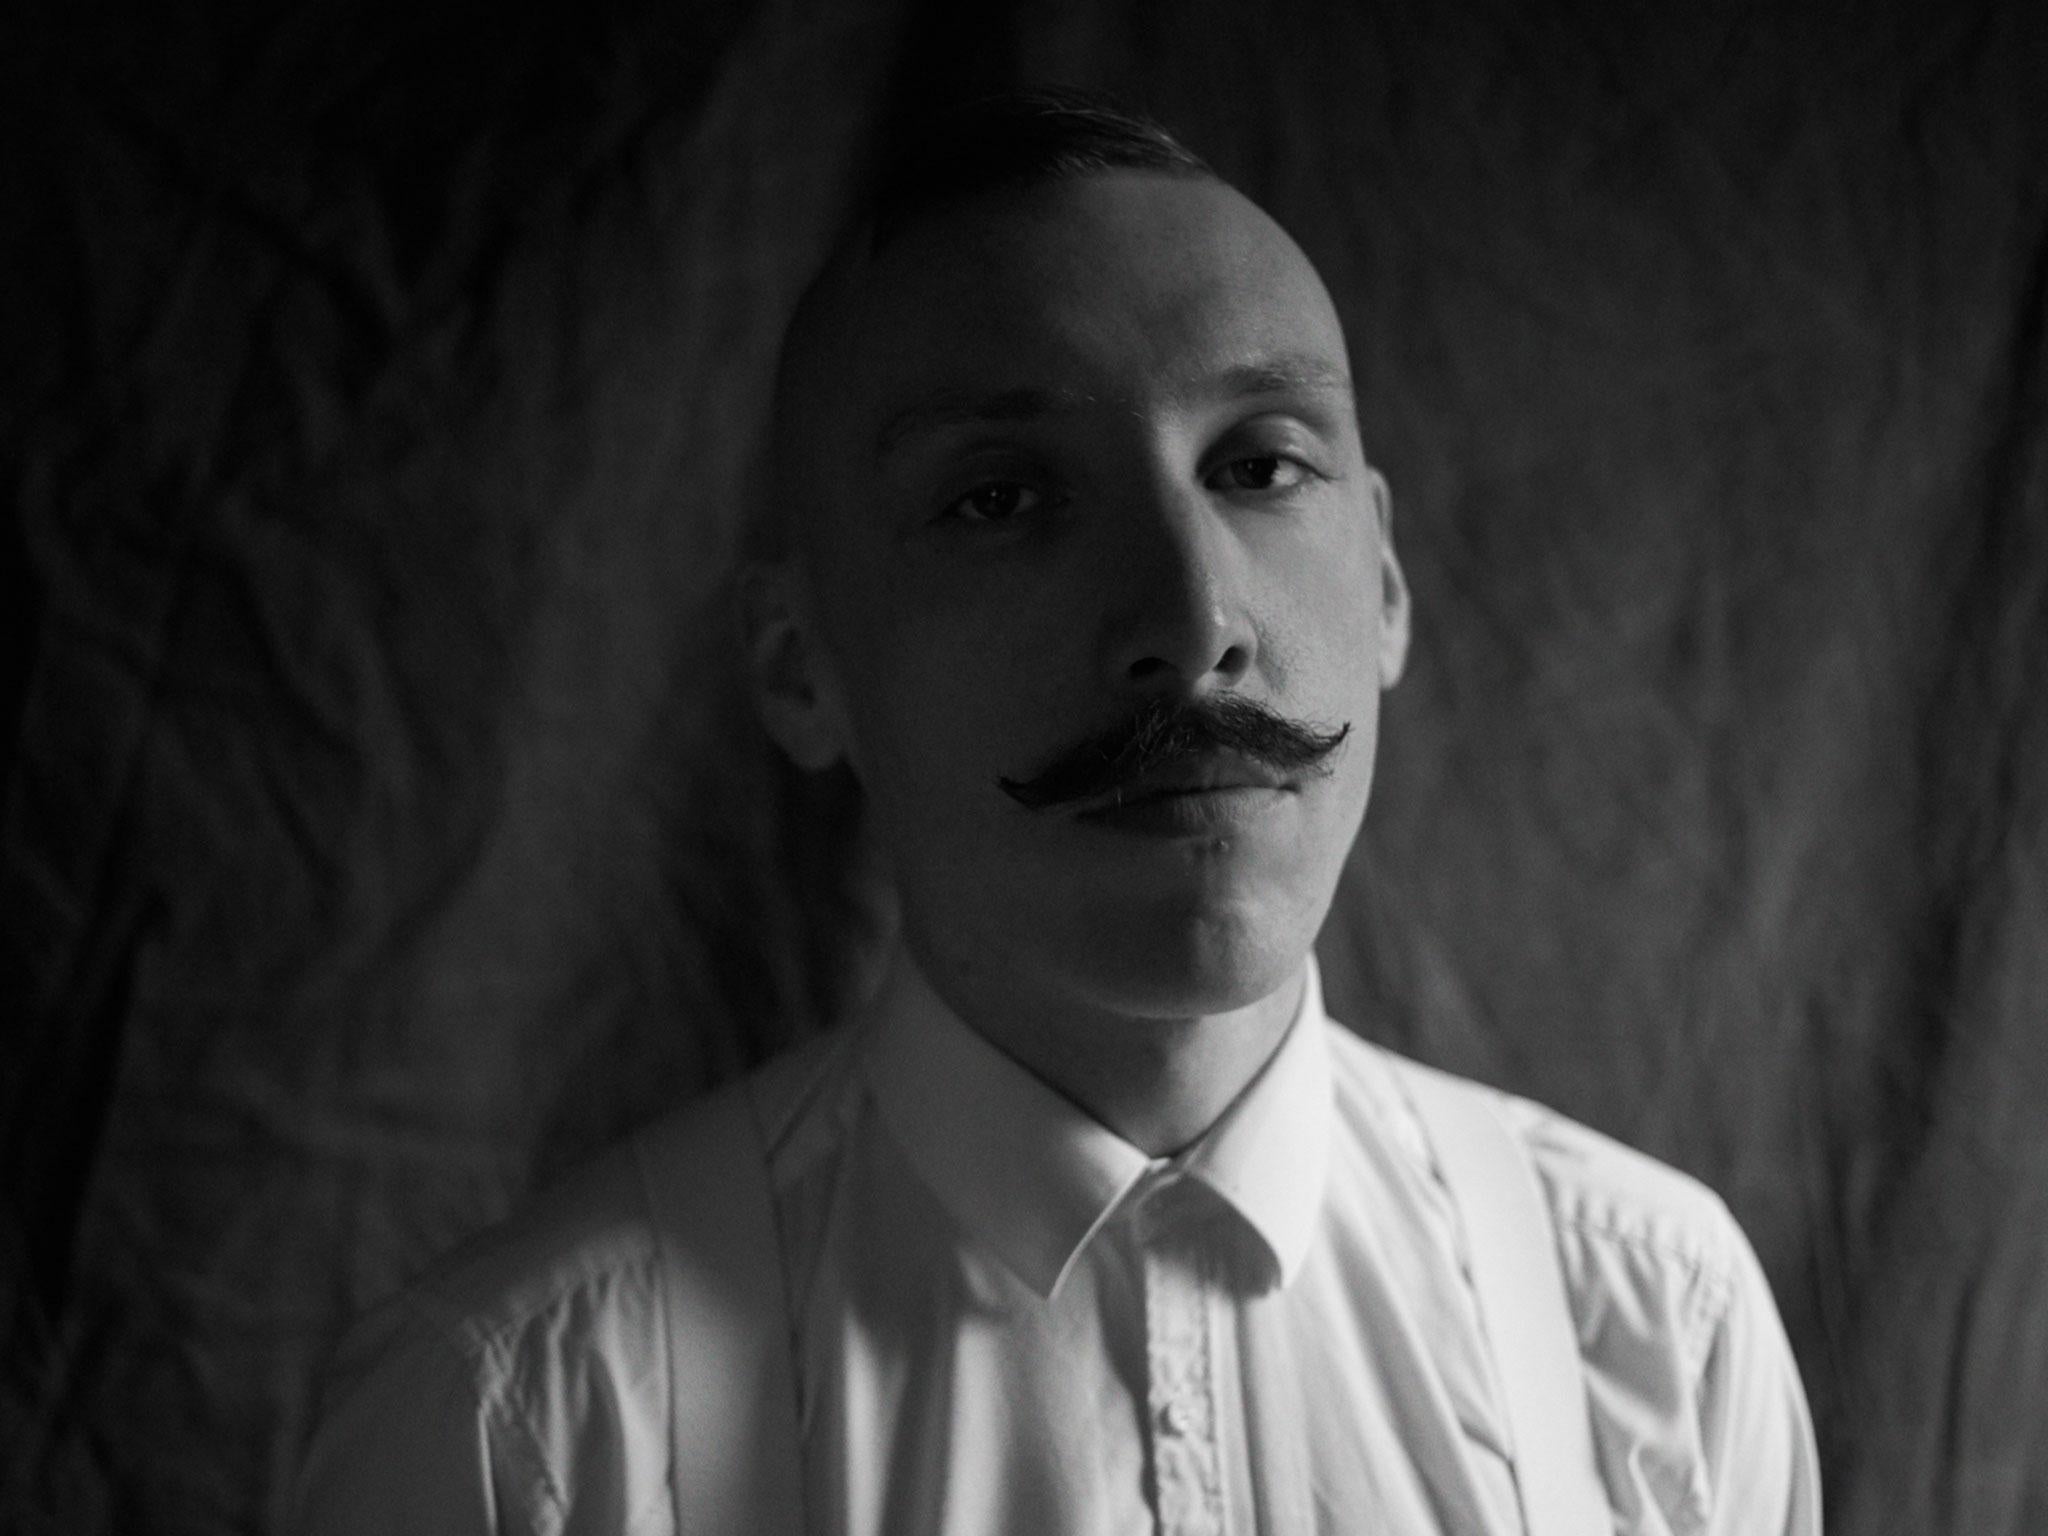 Jamie Lenman is currently gearing up to release a follow-up to his 2013 double album 'Muscle Memory'